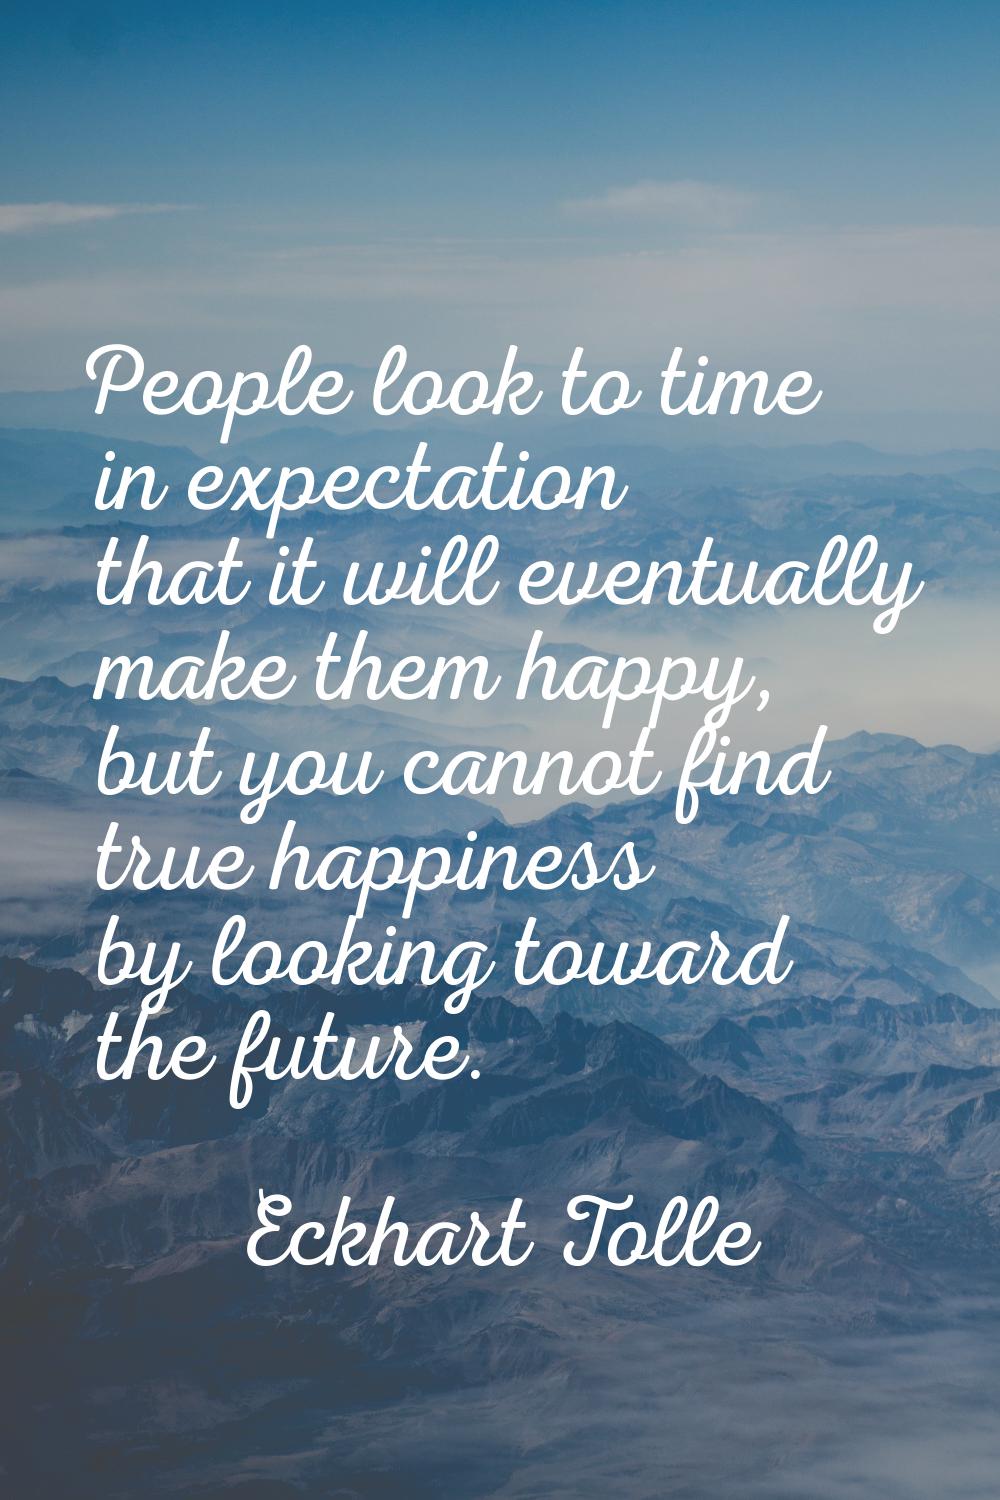 People look to time in expectation that it will eventually make them happy, but you cannot find tru